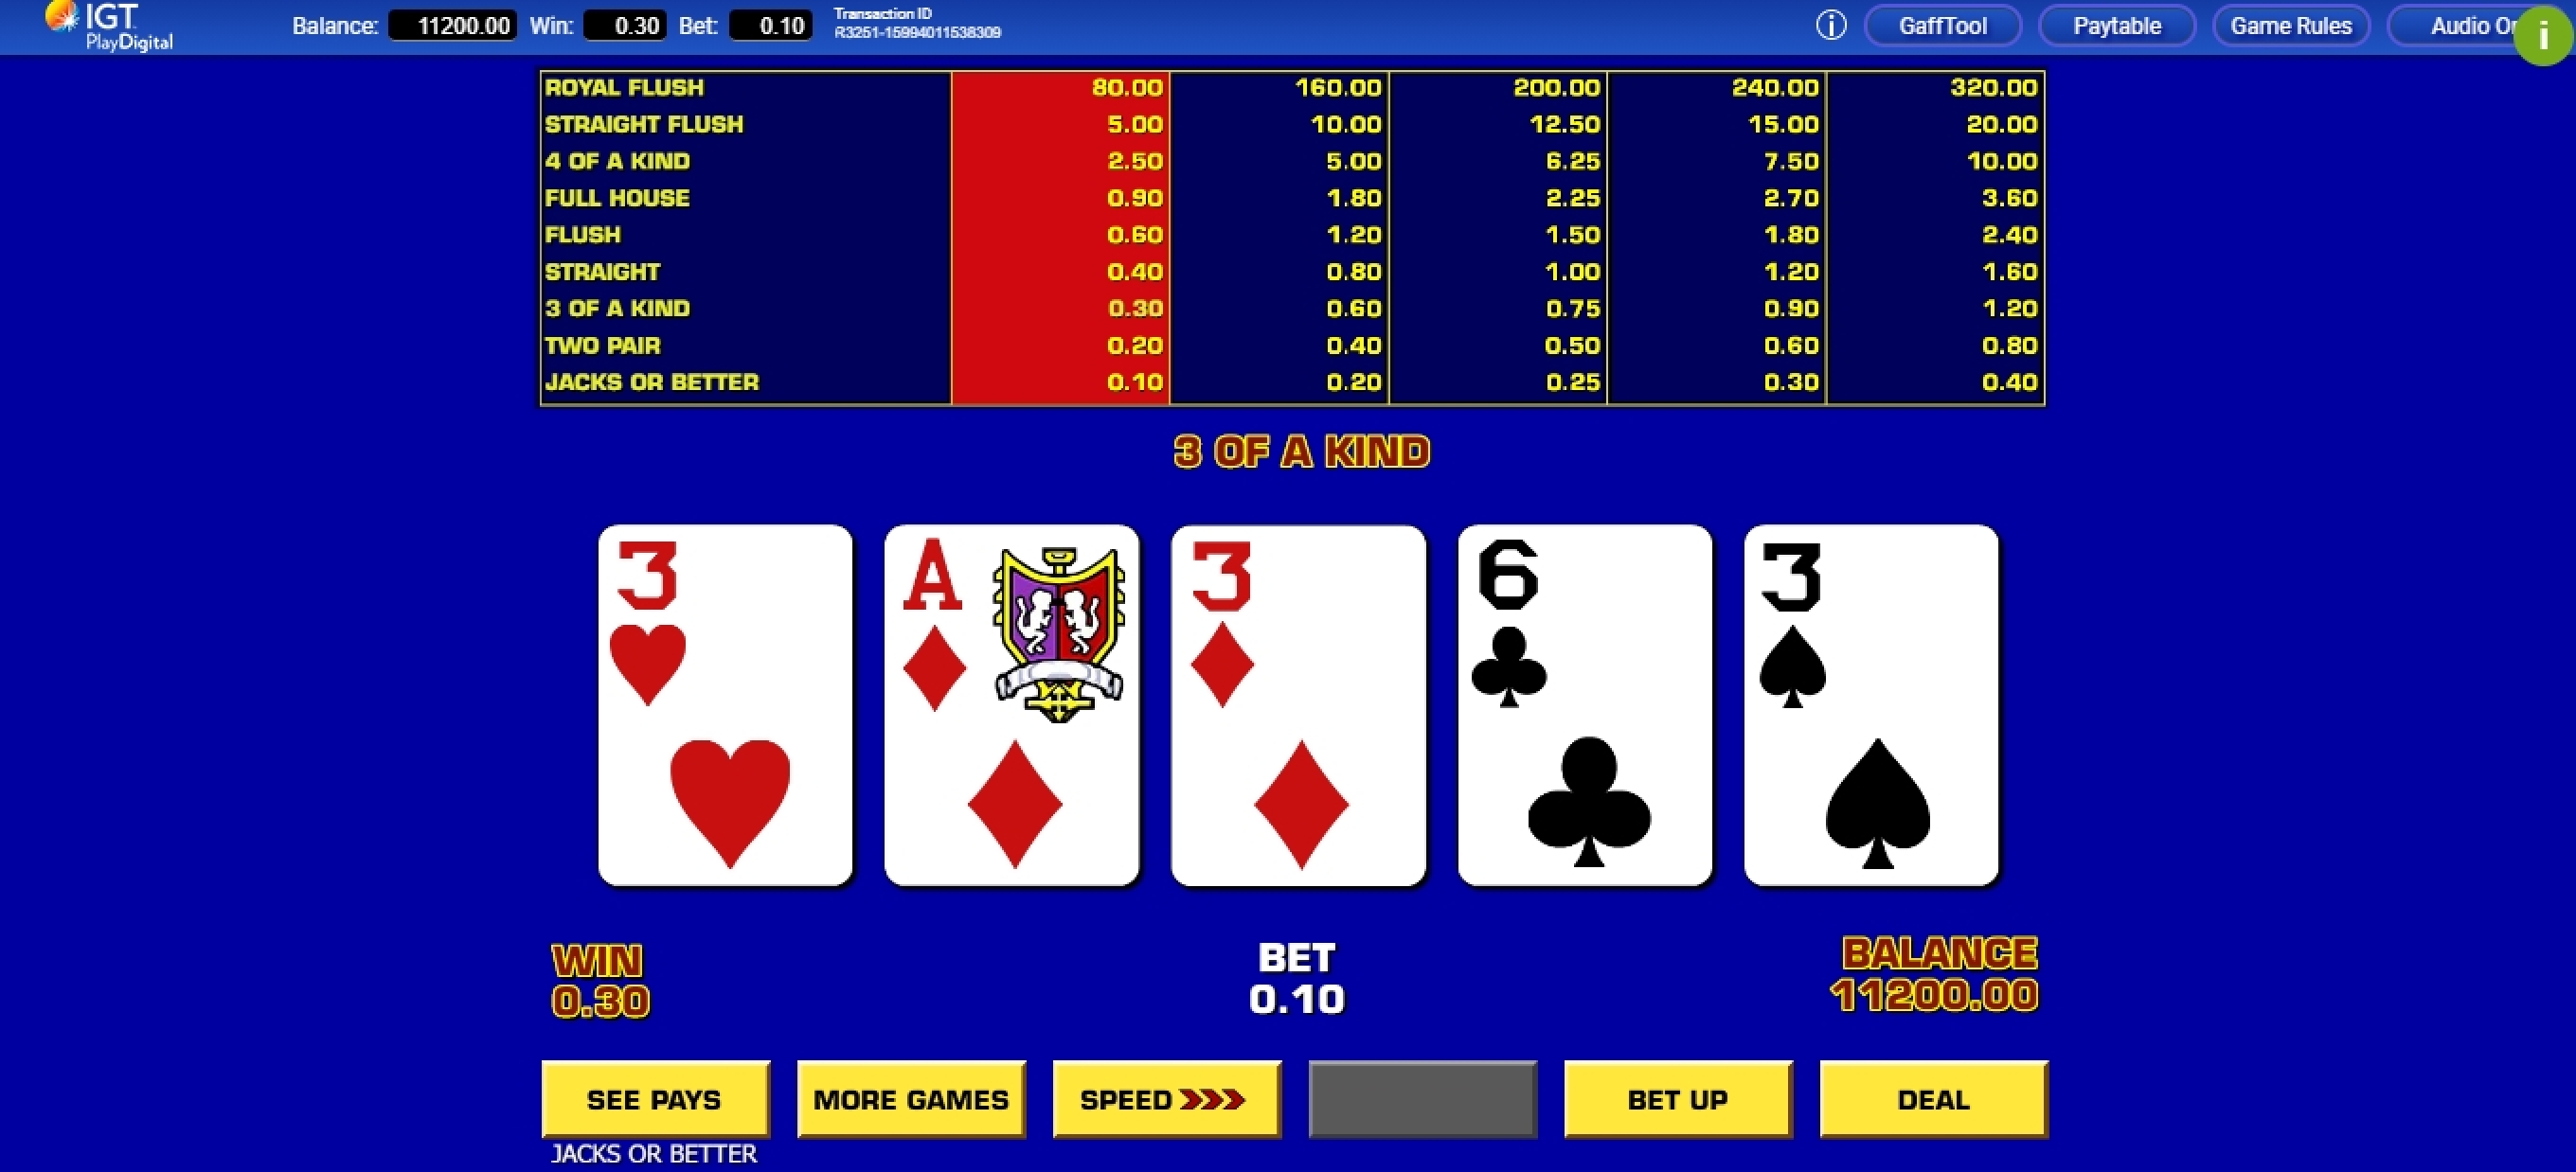 Win Money in Game King Video Poker Free Slot Game by IGT